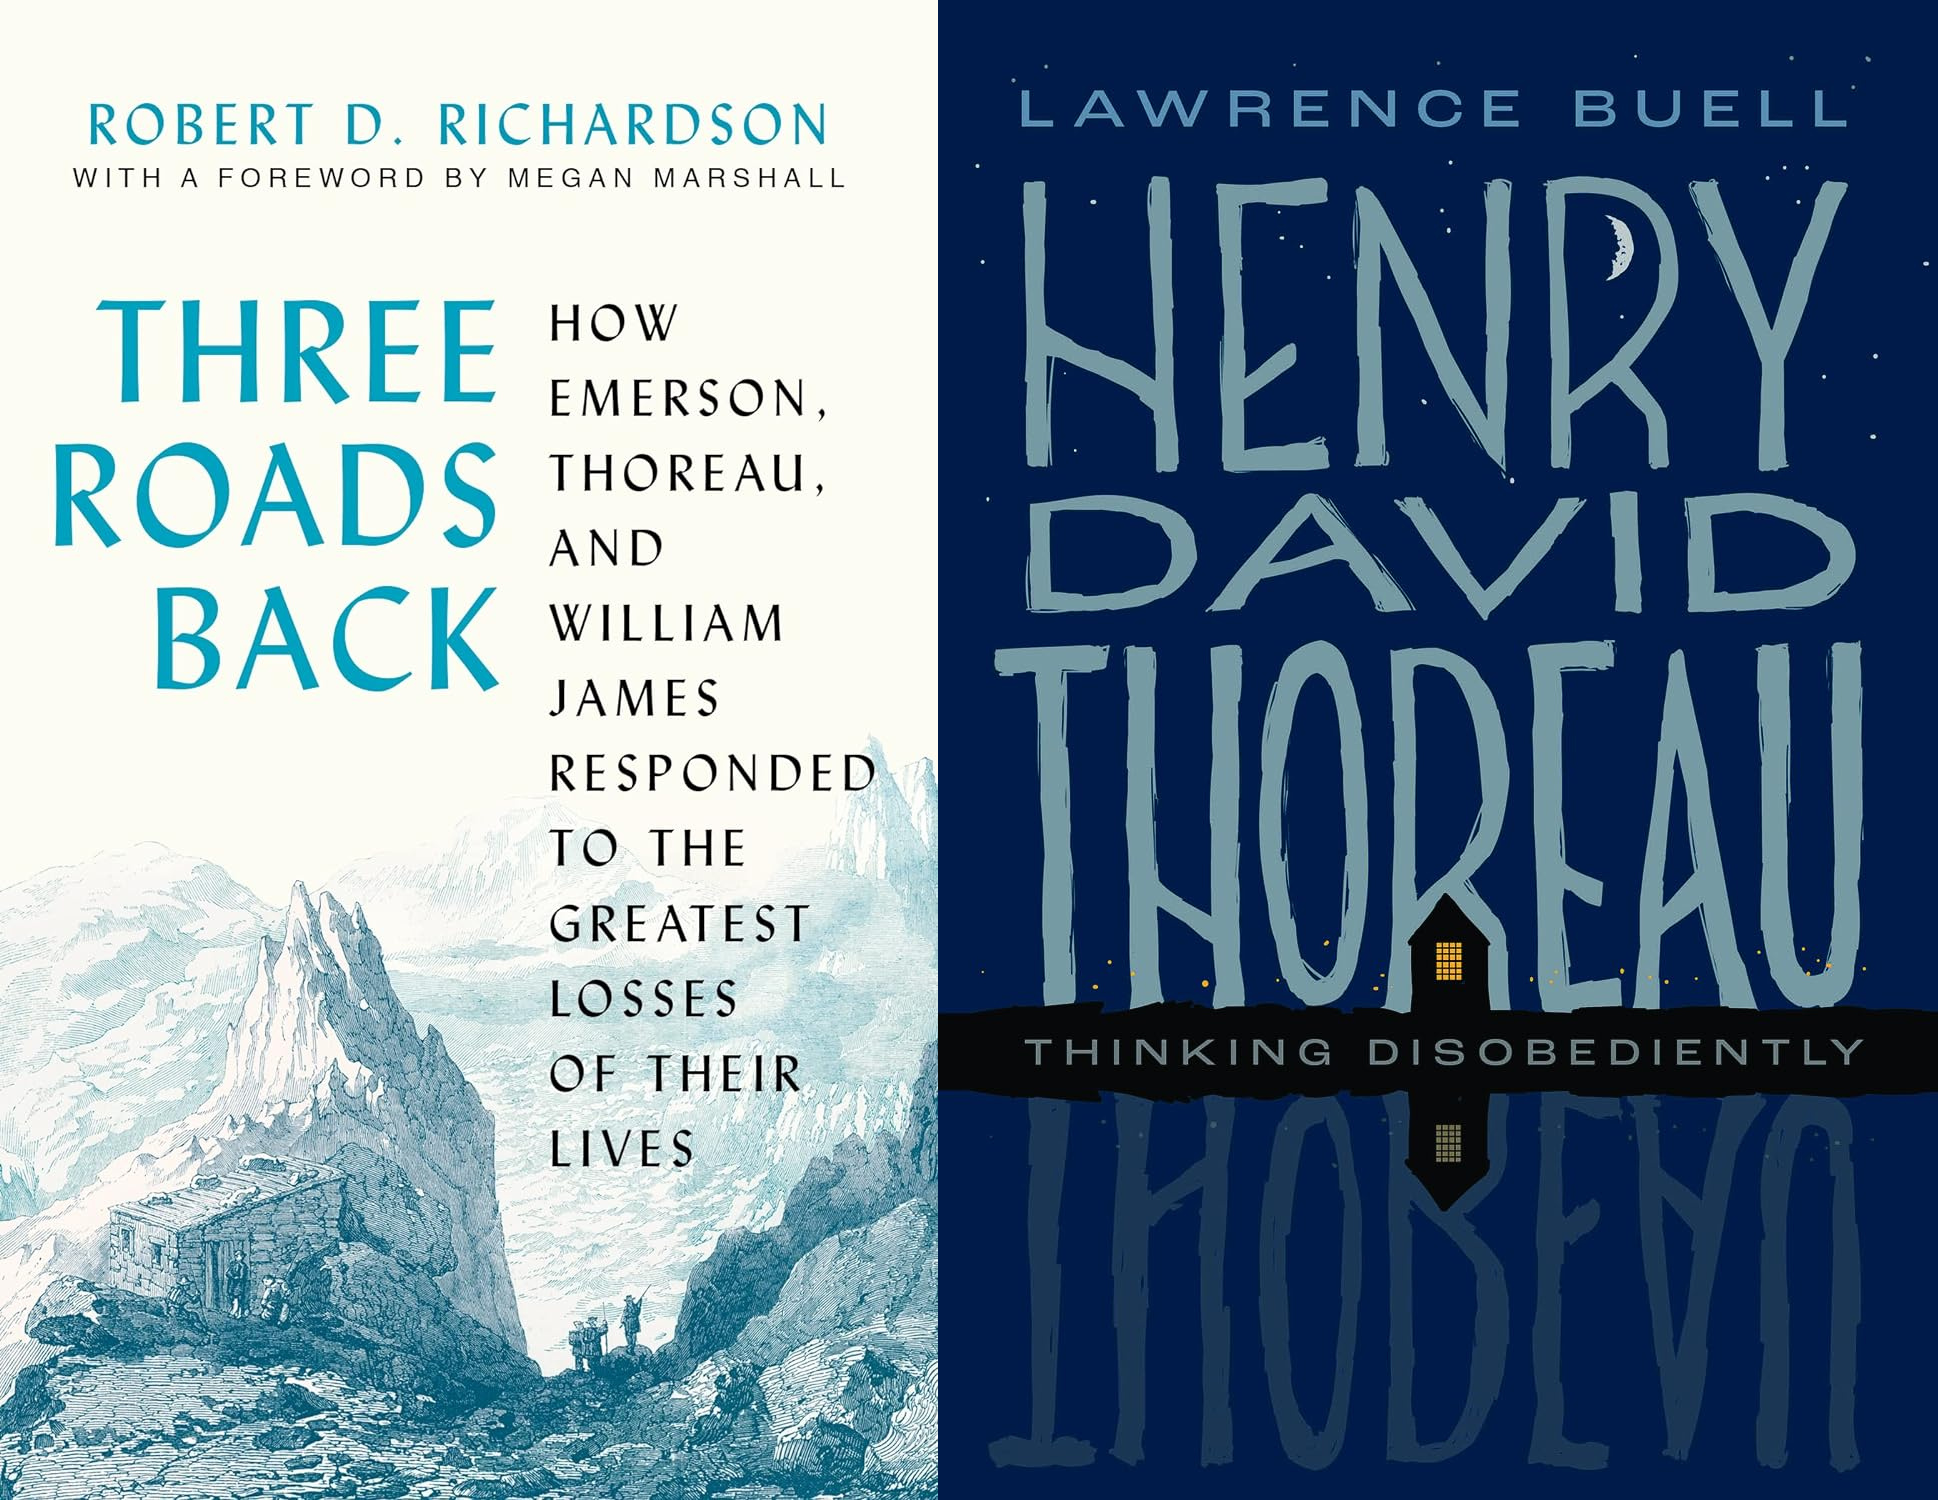 To Walden: On Lawrence Buell’s “Henry David Thoreau” and Robert D. Richardson’s “Three Roads Back”